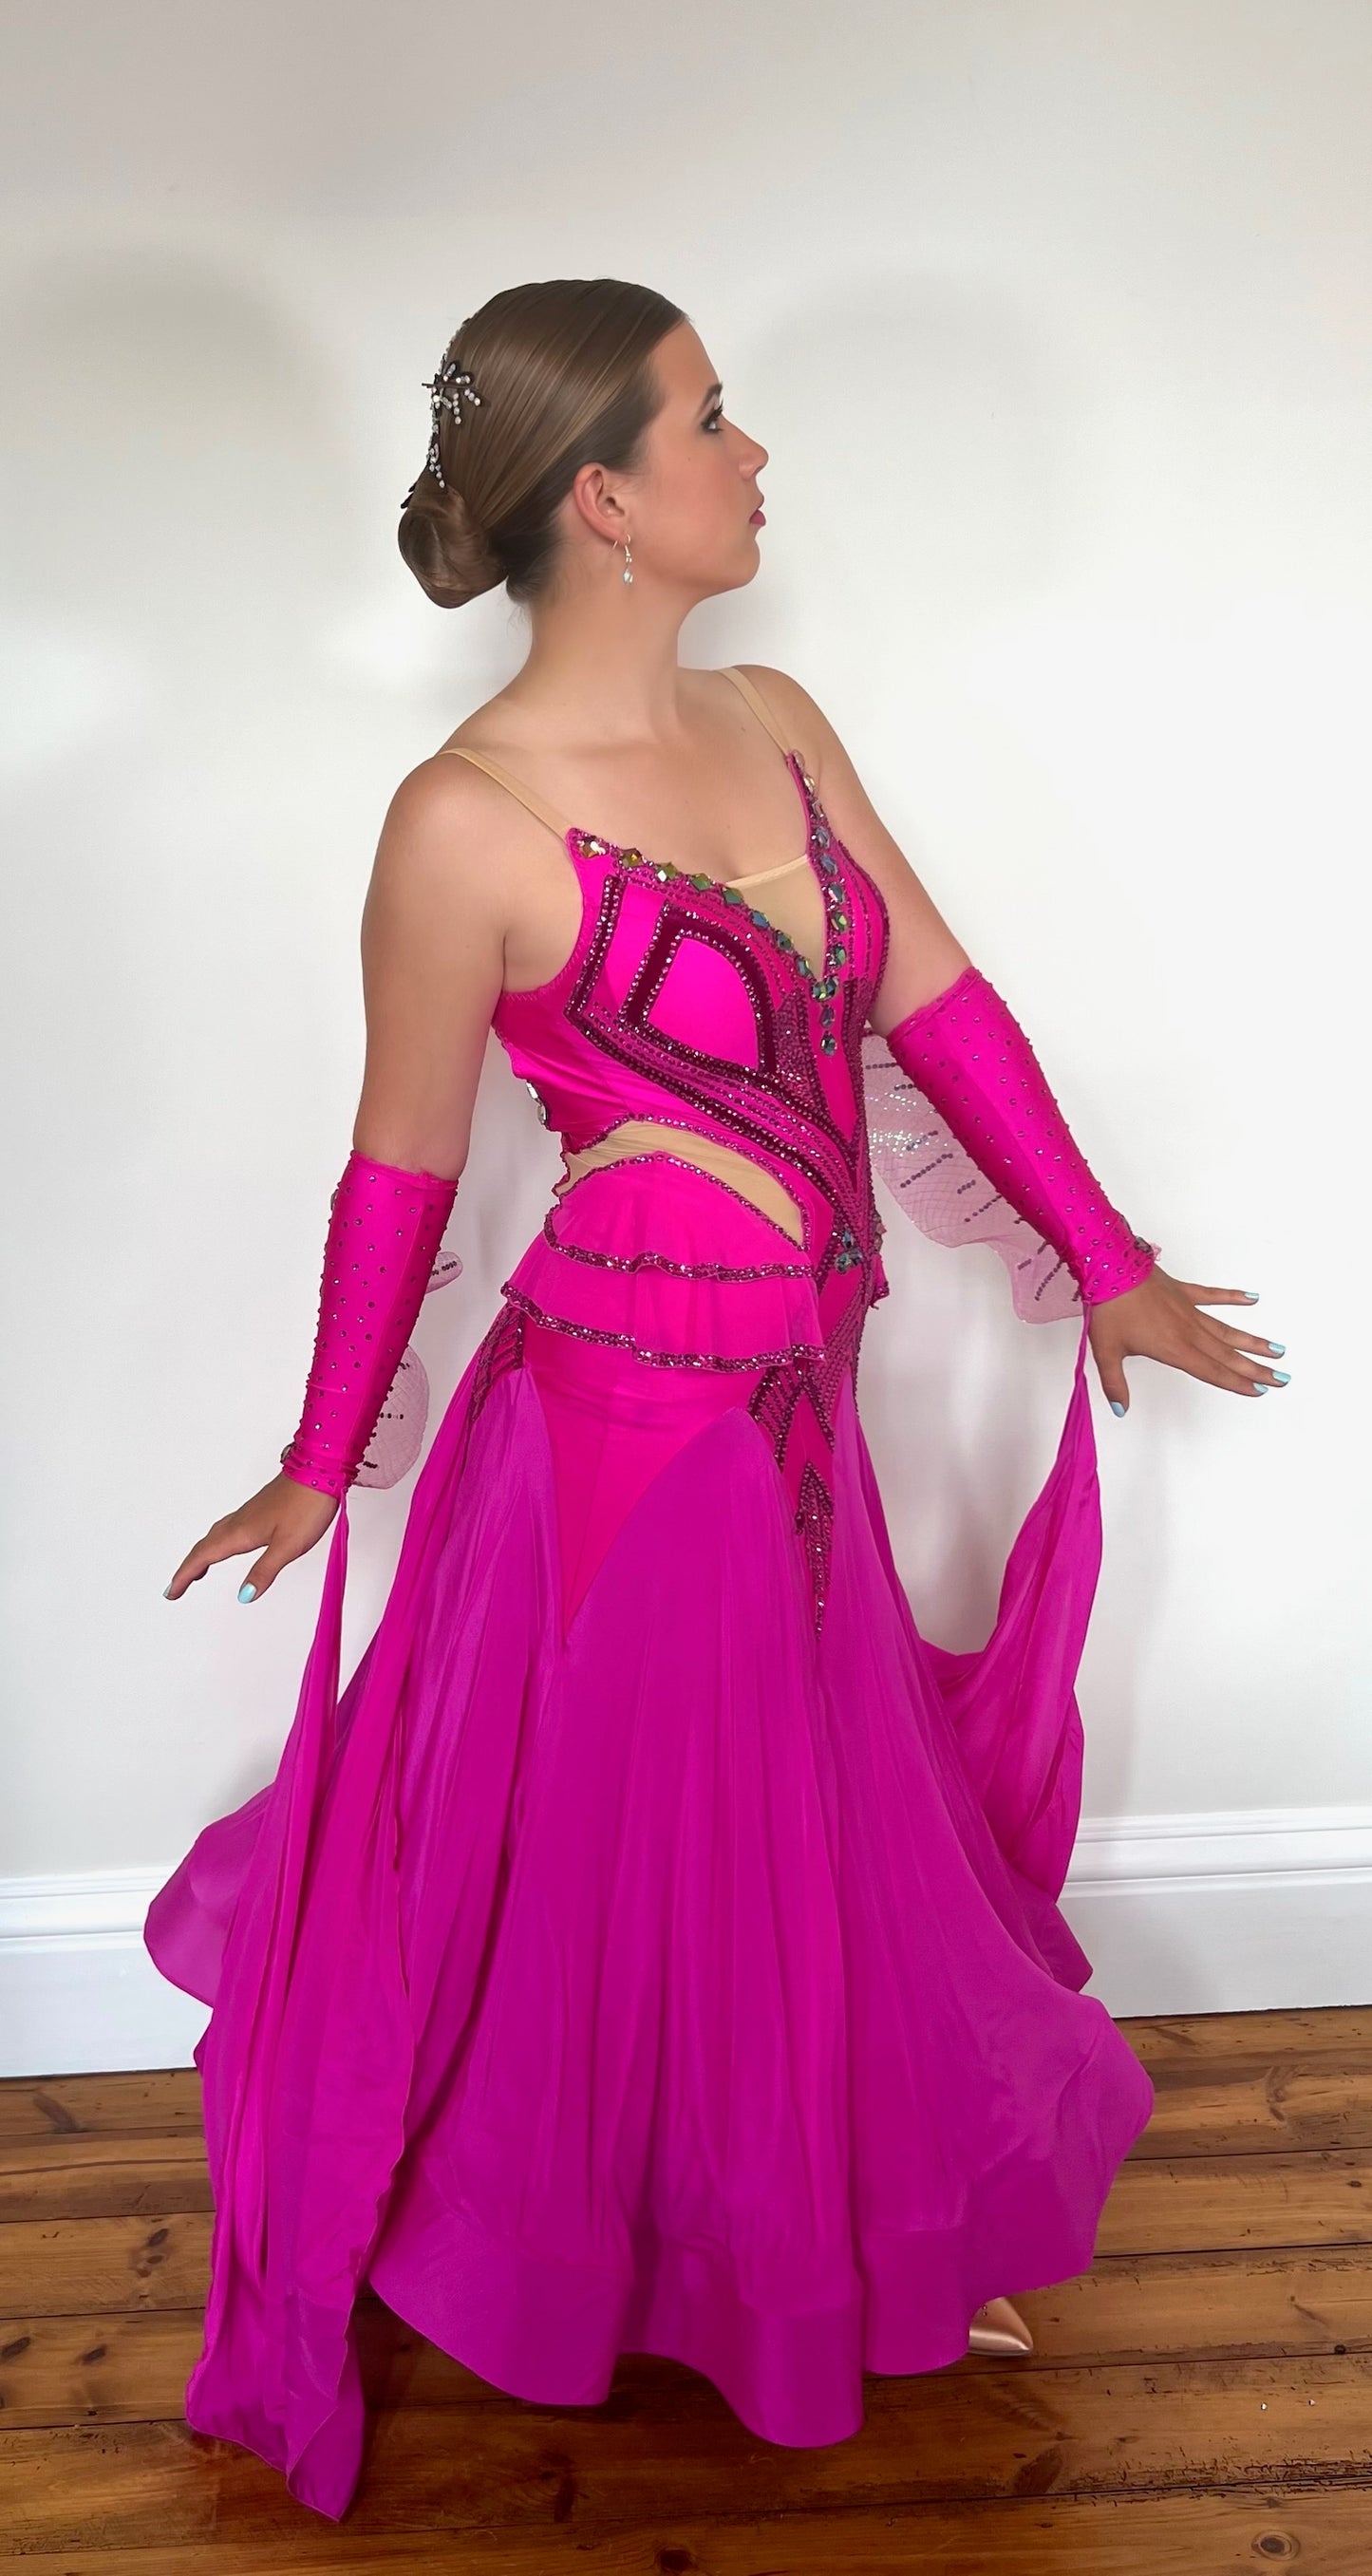 211 Magenta Pink Ballroom Dress. Flesh detailed panelling throughout bodice. Gloveless with organza detail & floats. Stoned in magenta